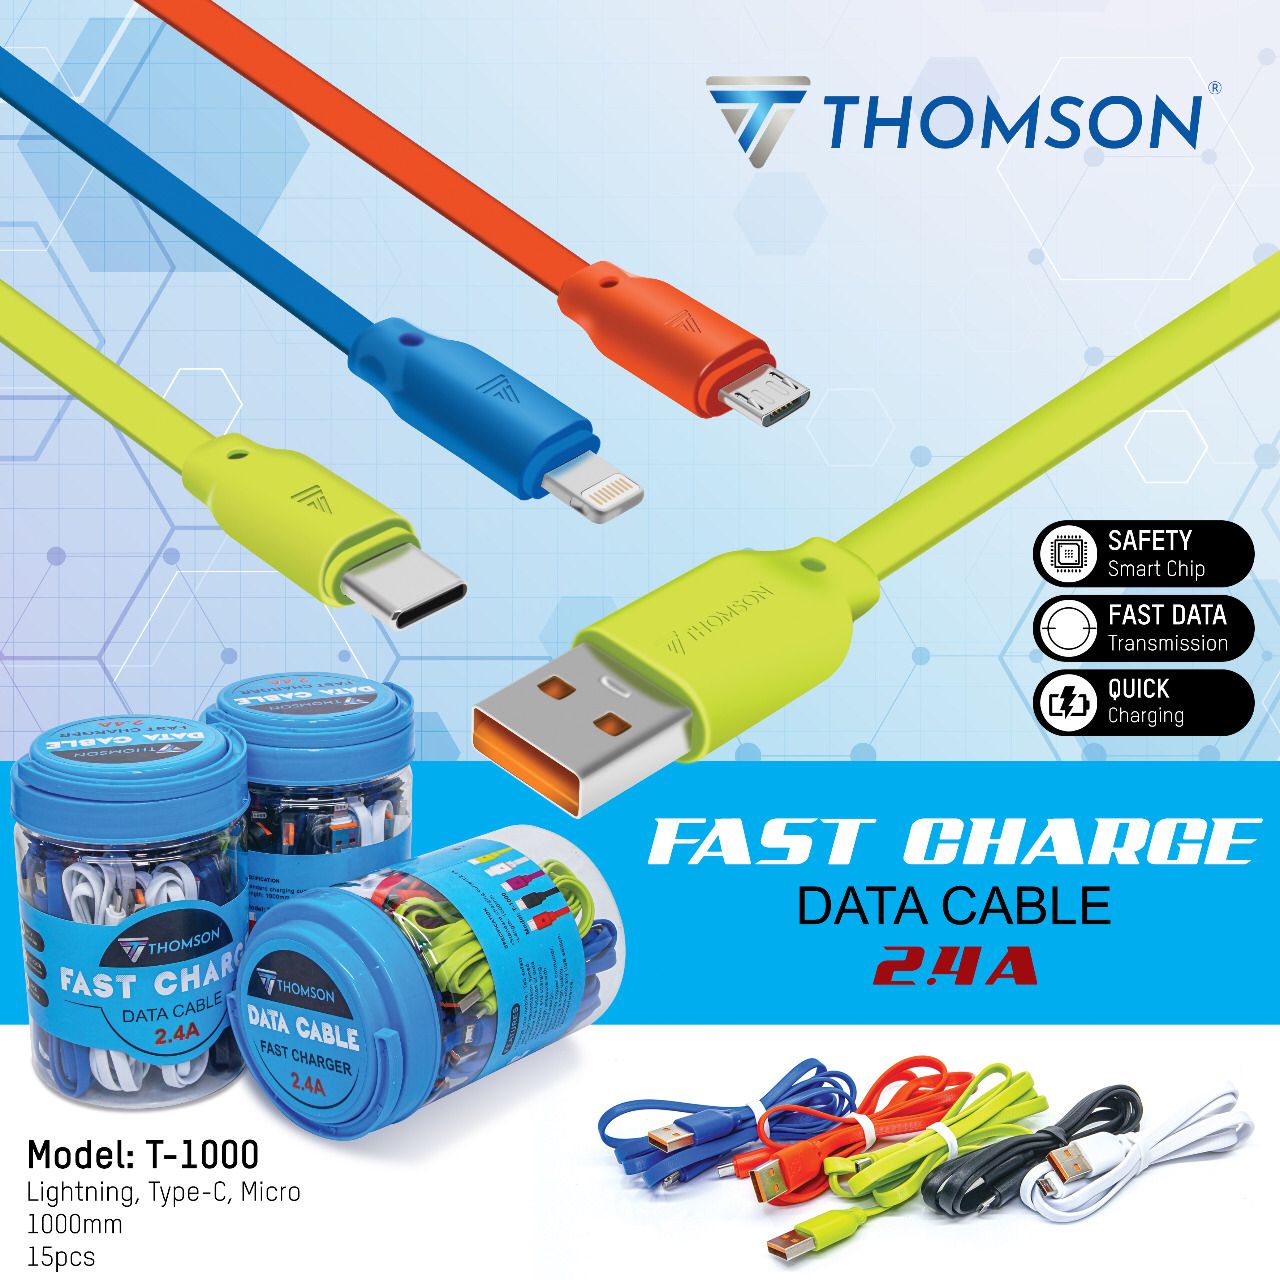 KABEL DATA TOPLES THOMSON T-1000 IPHONE